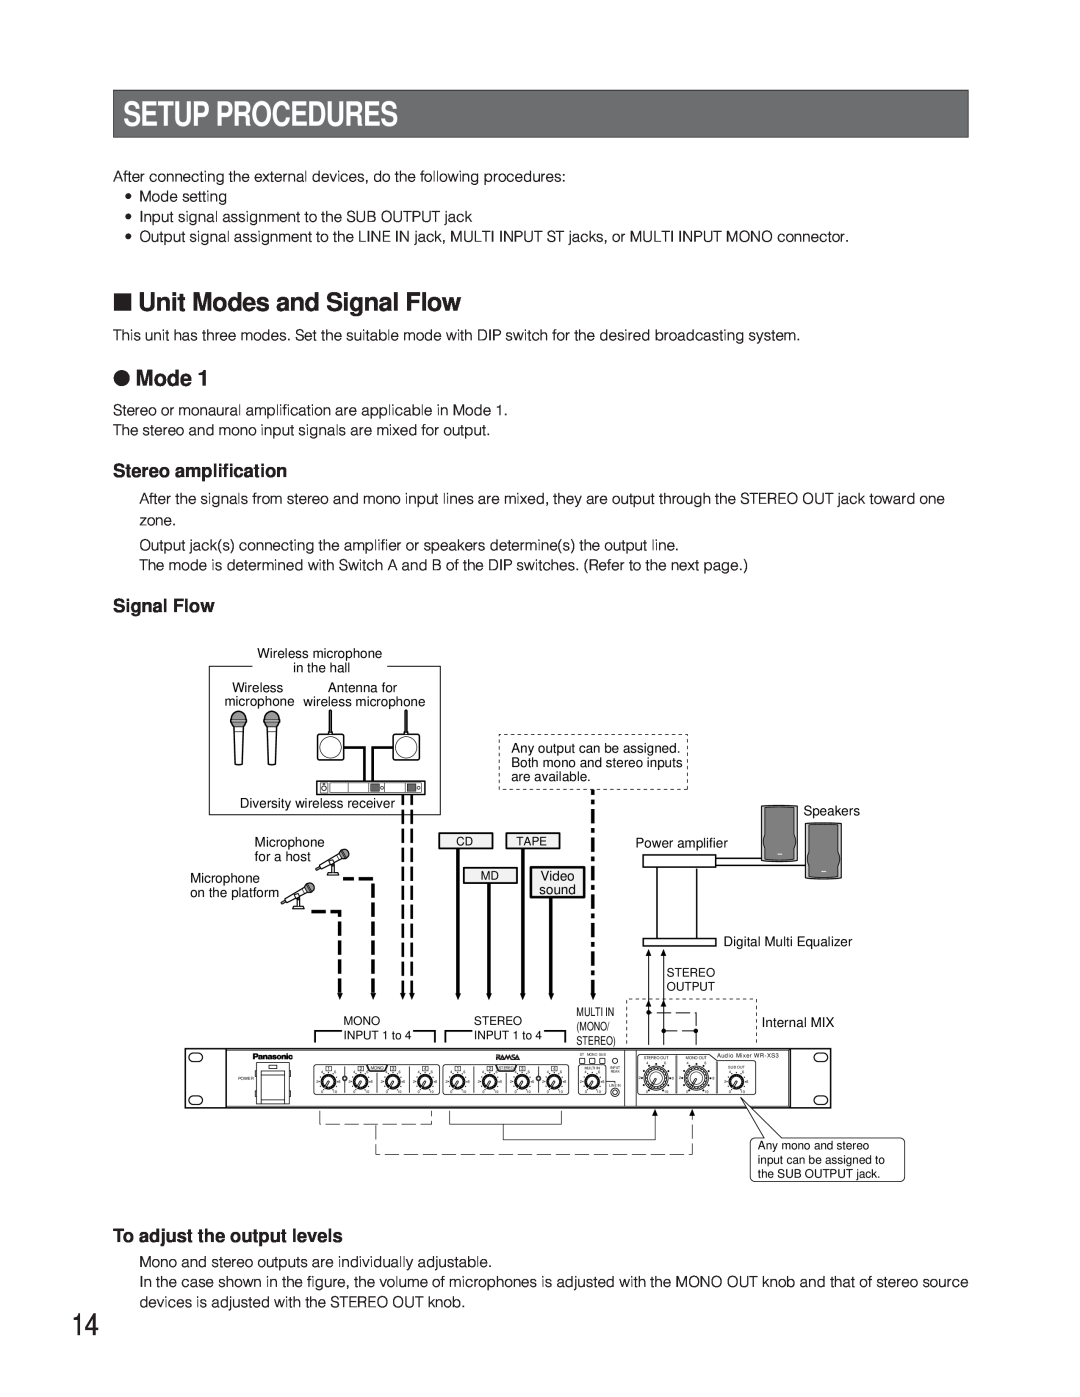 Panasonic WR-XS3P Setup Procedures, Unit Modes and Signal Flow, Stereo amplification, To adjust the output levels 